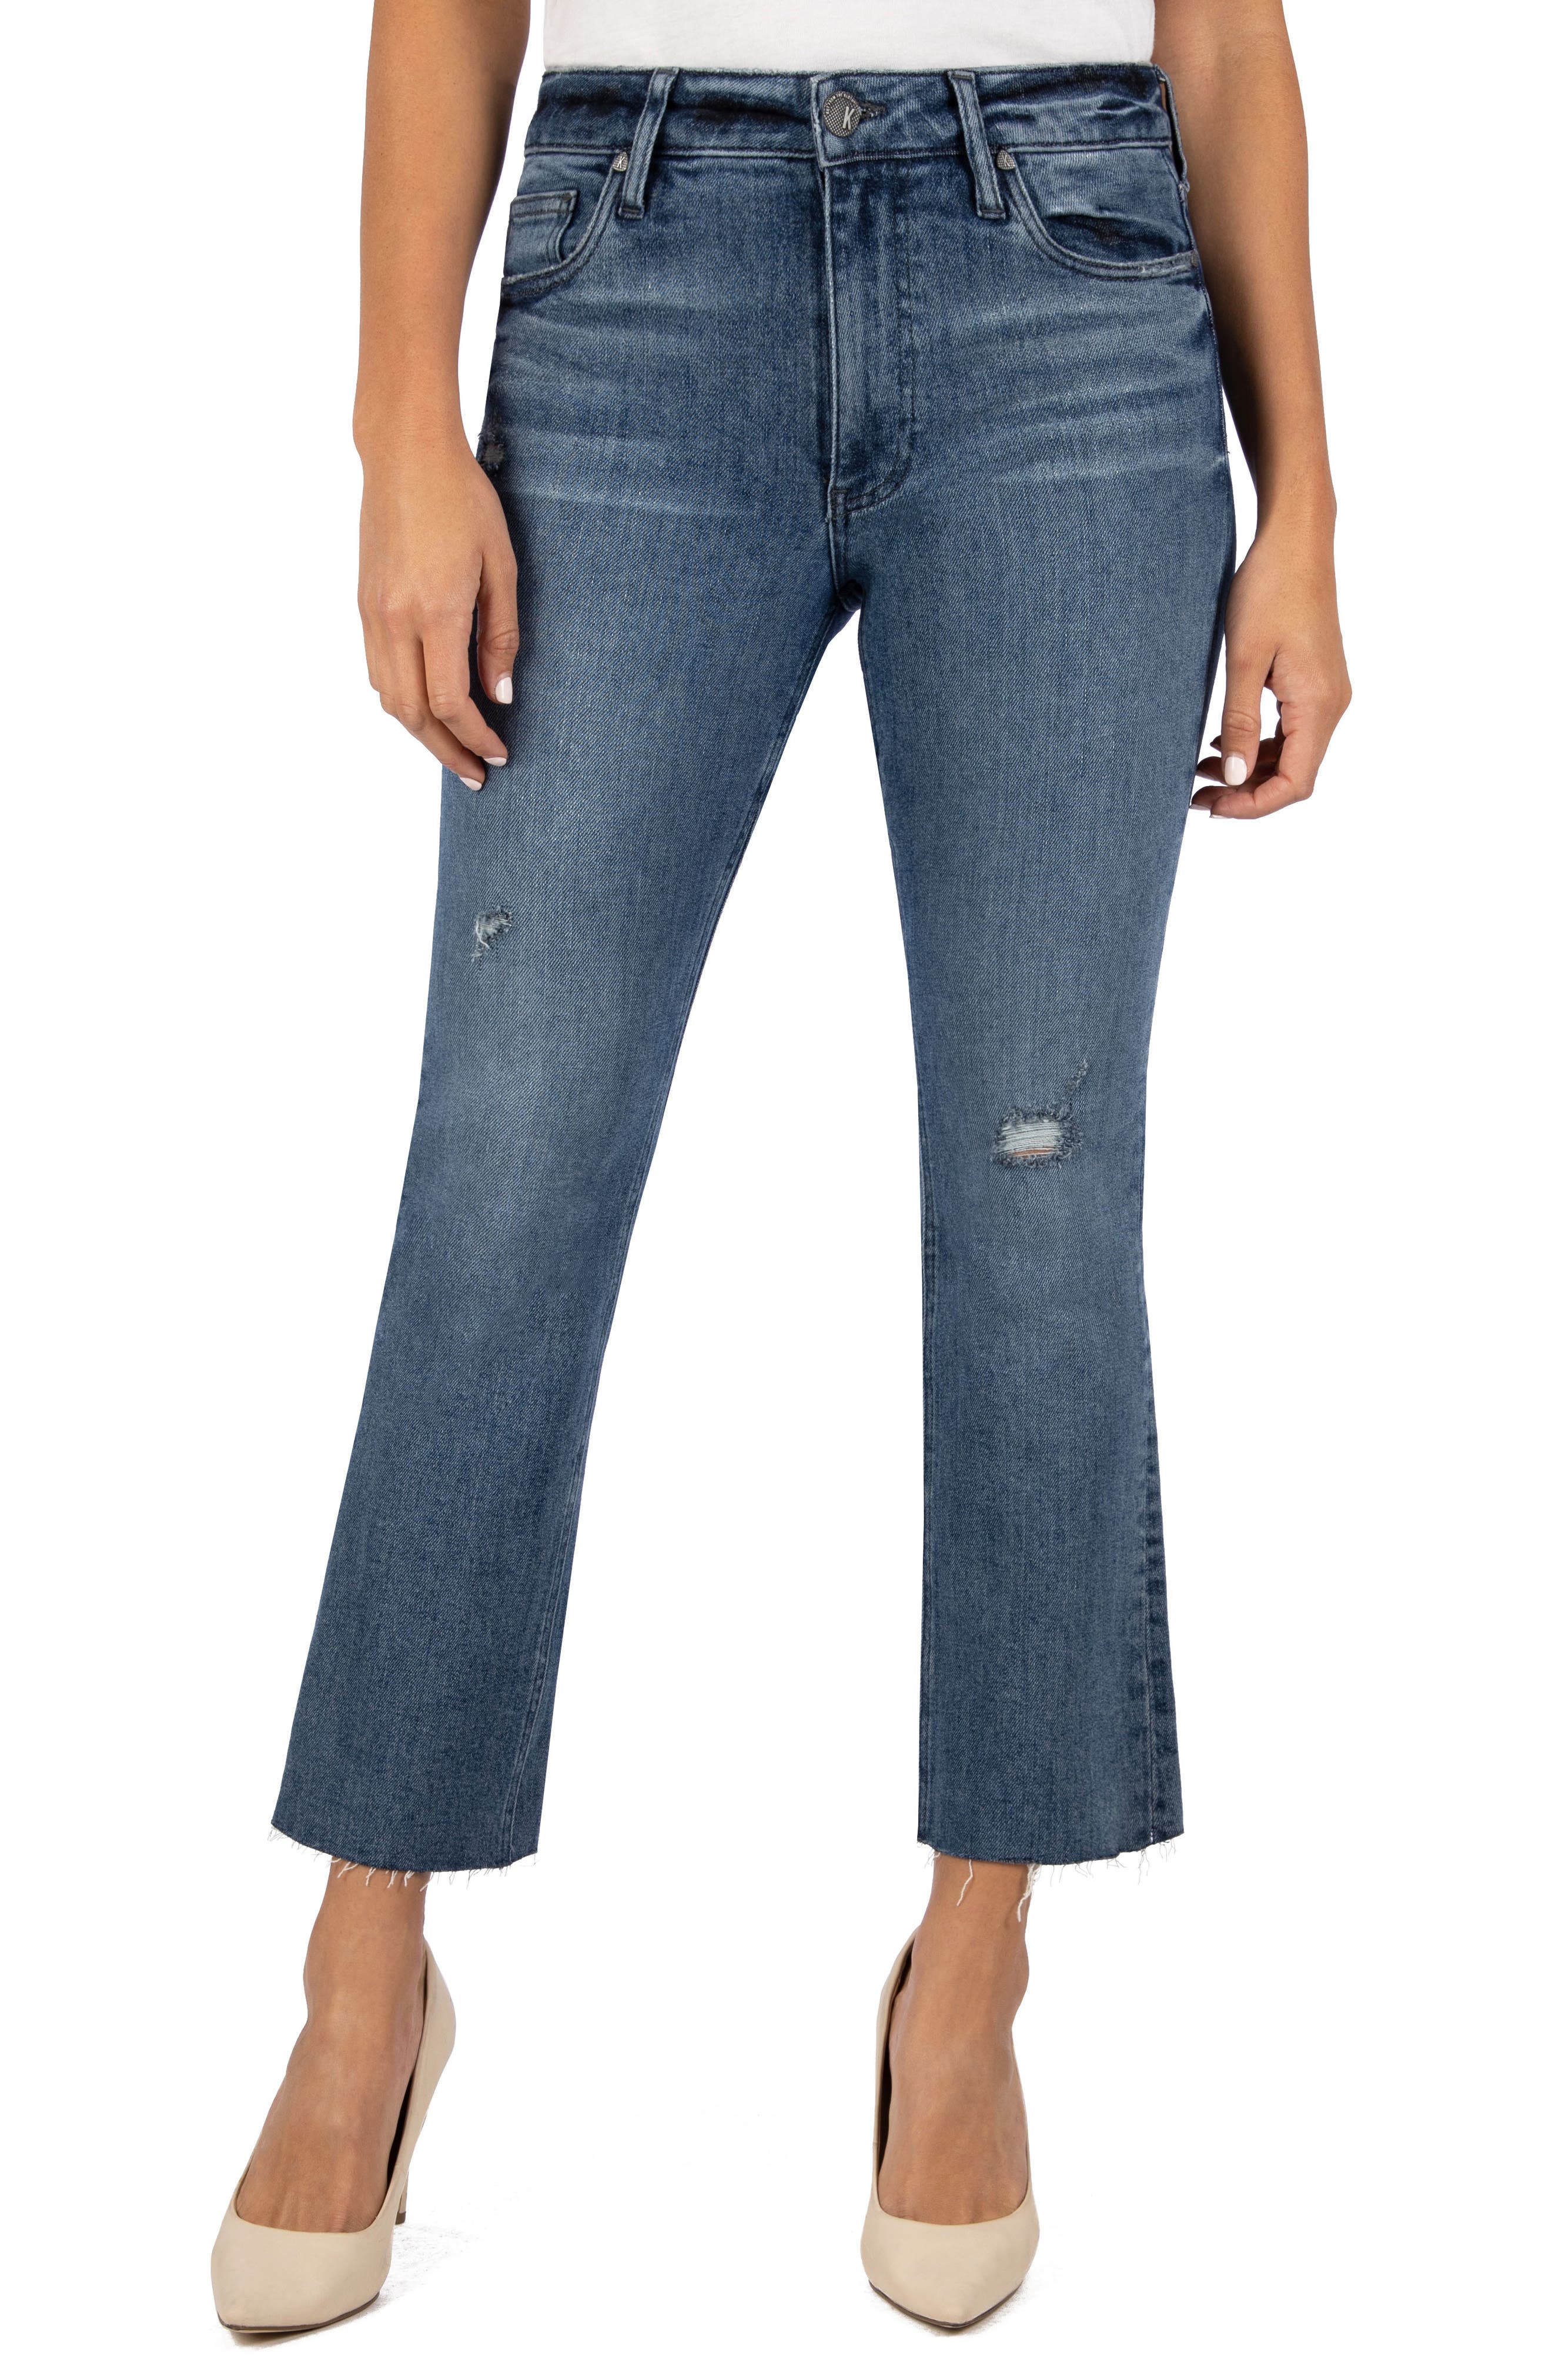 size 00 flare jeans